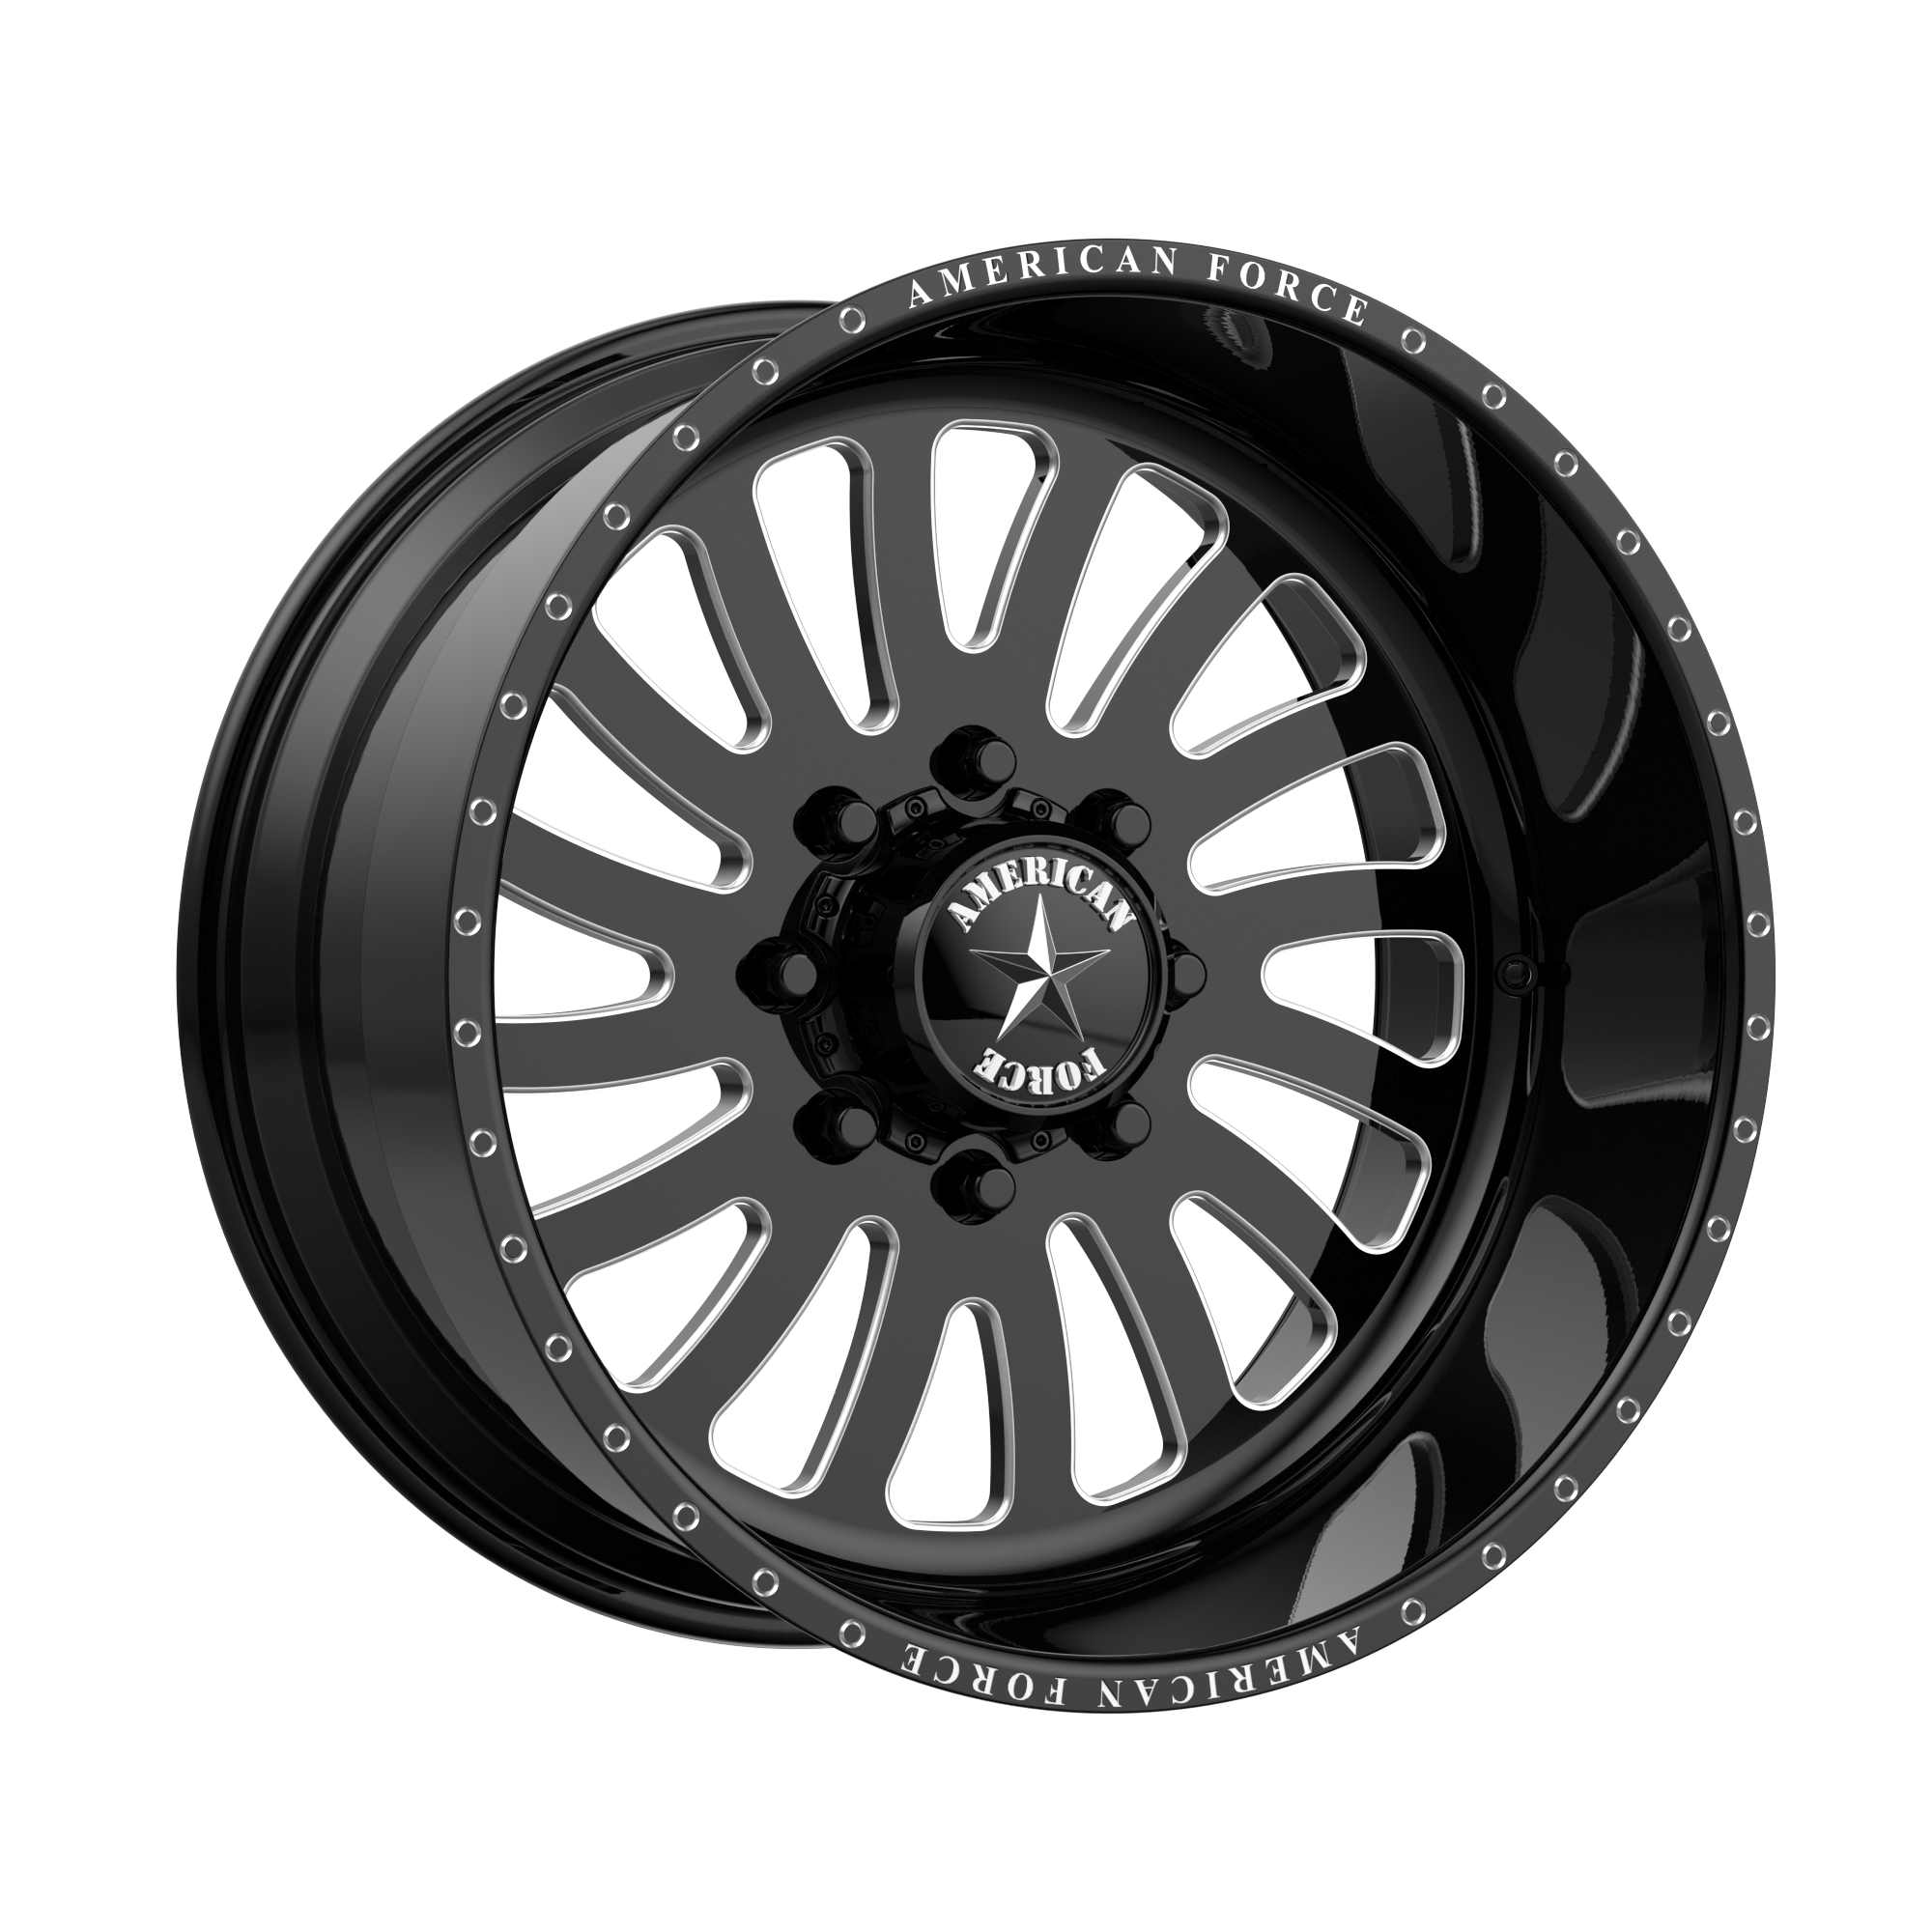 OCTANE SS 20x10 6x135.00 GLOSS BLACK MACHINED (-25 mm) - Tires and Engine Performance